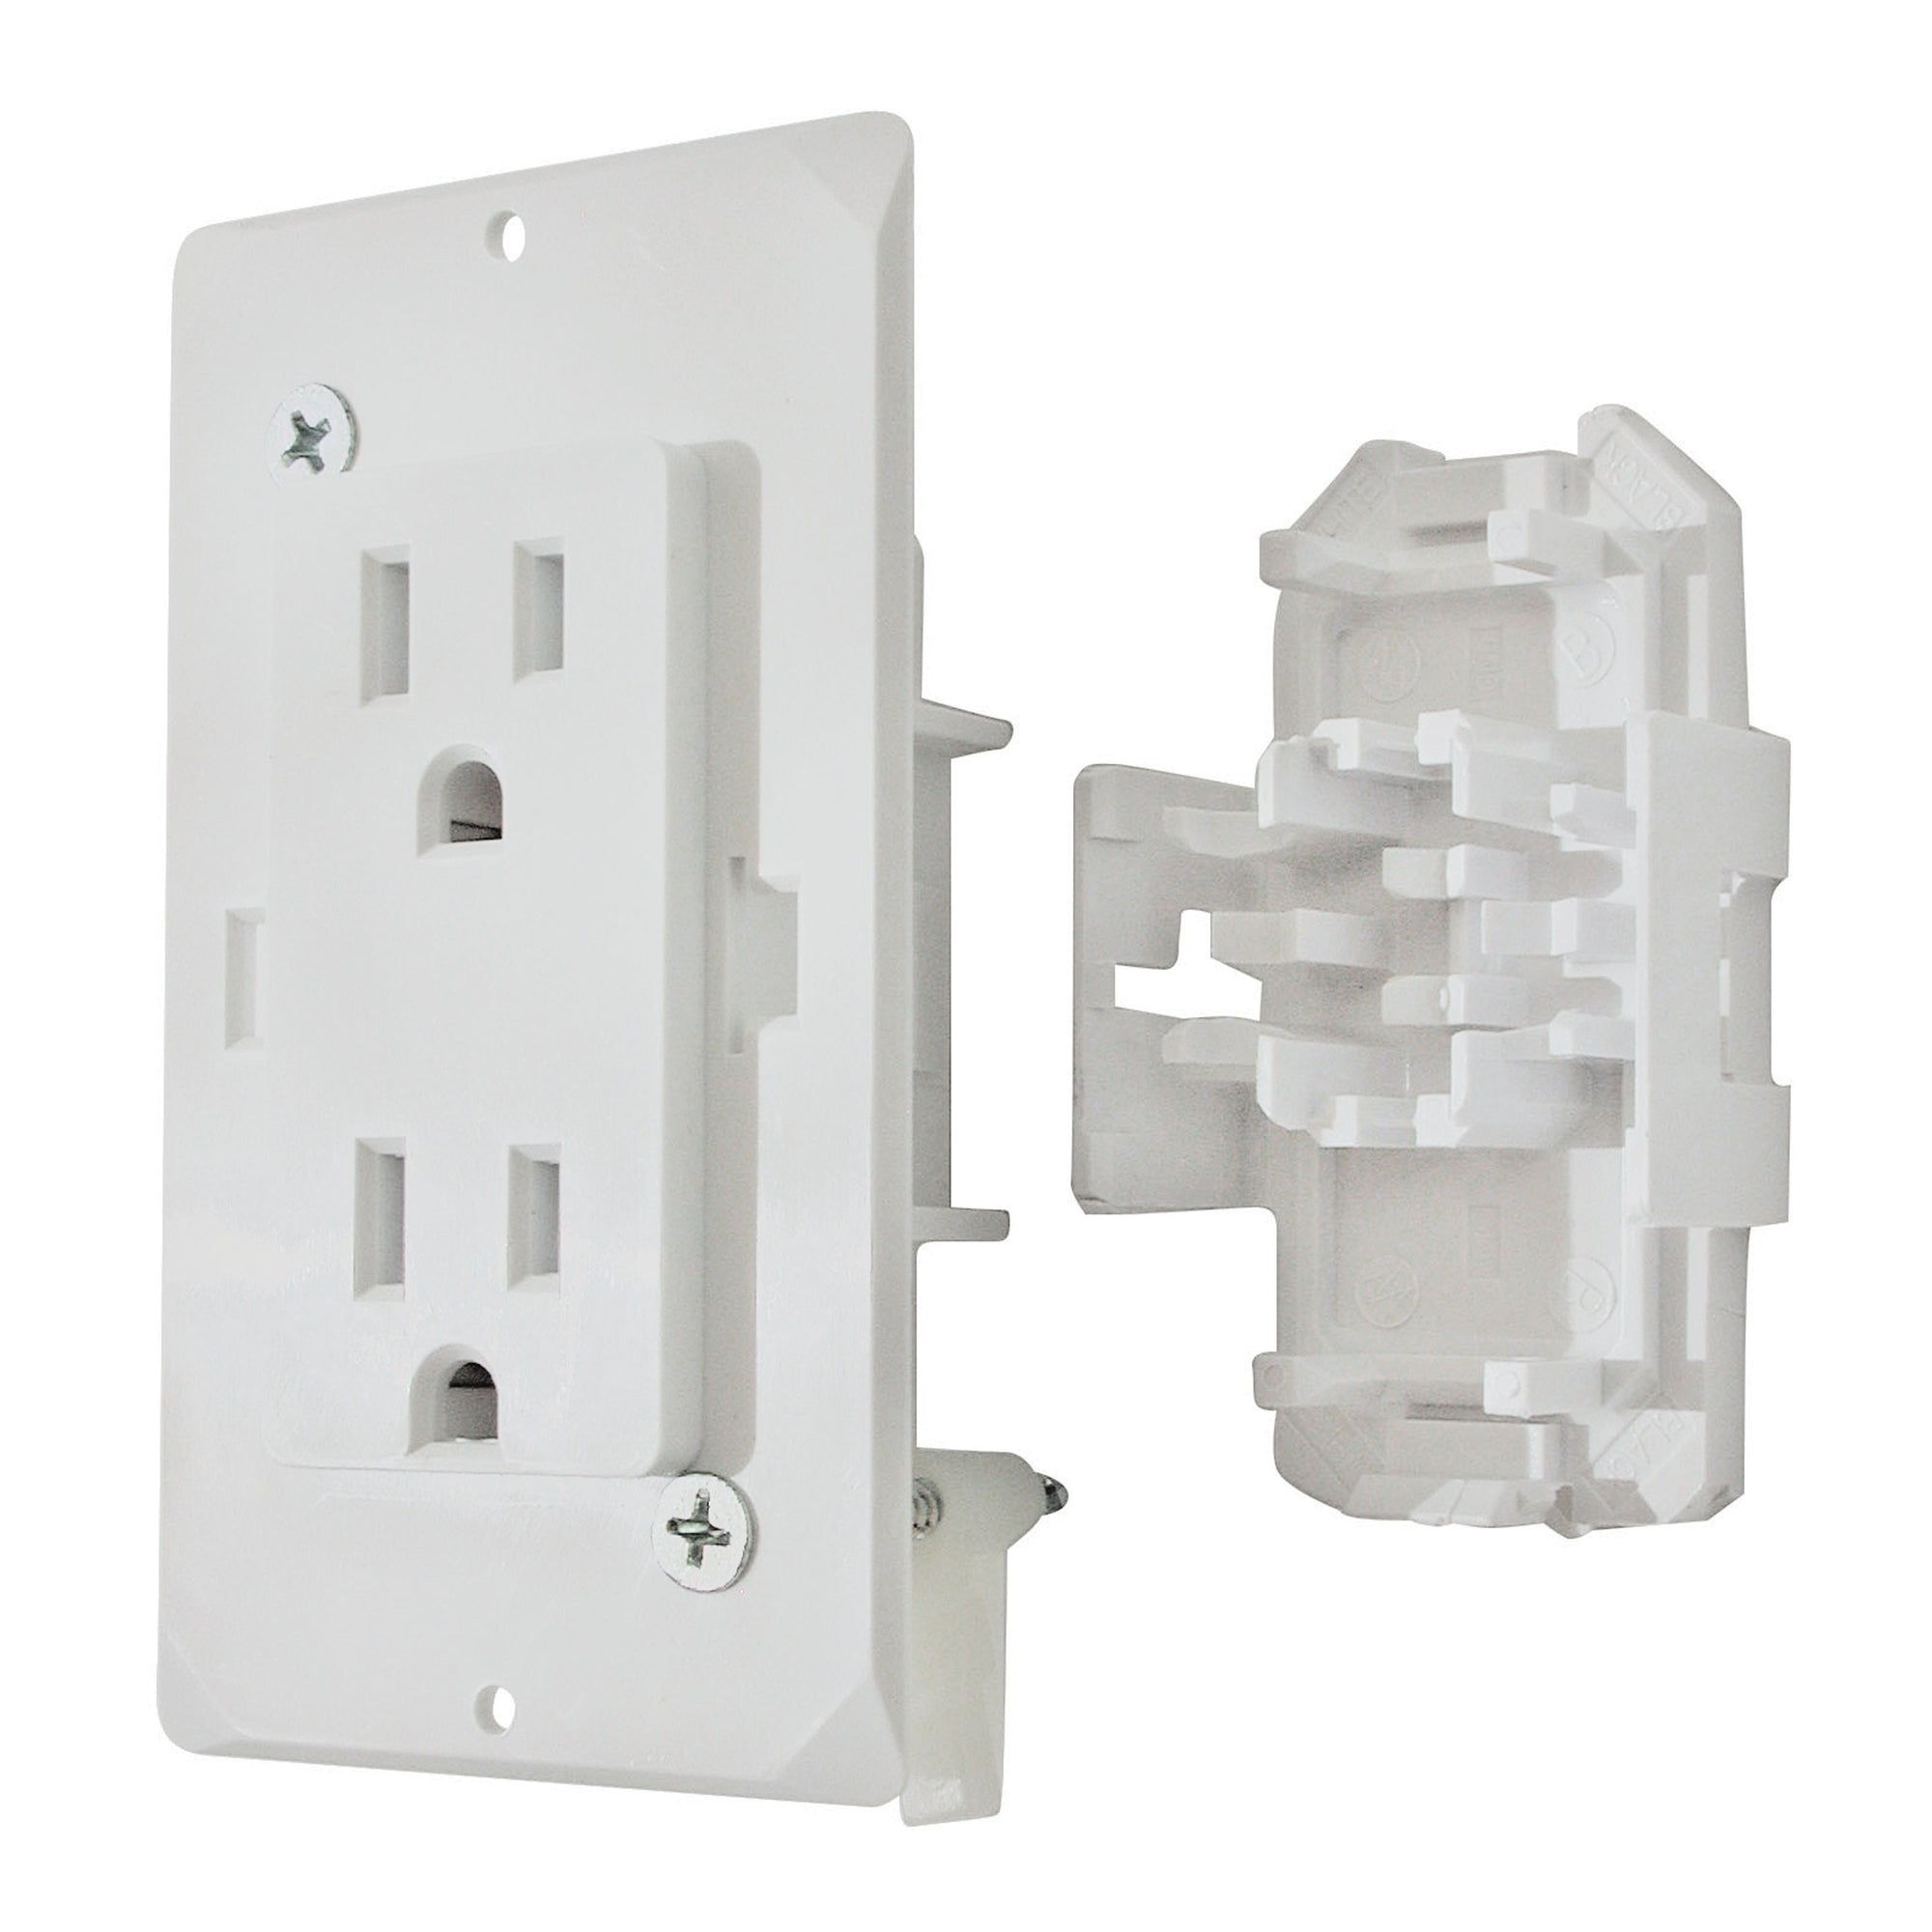 Diamond Group by Valterra DG20TVP Decor Receptacle with Cover - 20A, 125V, White